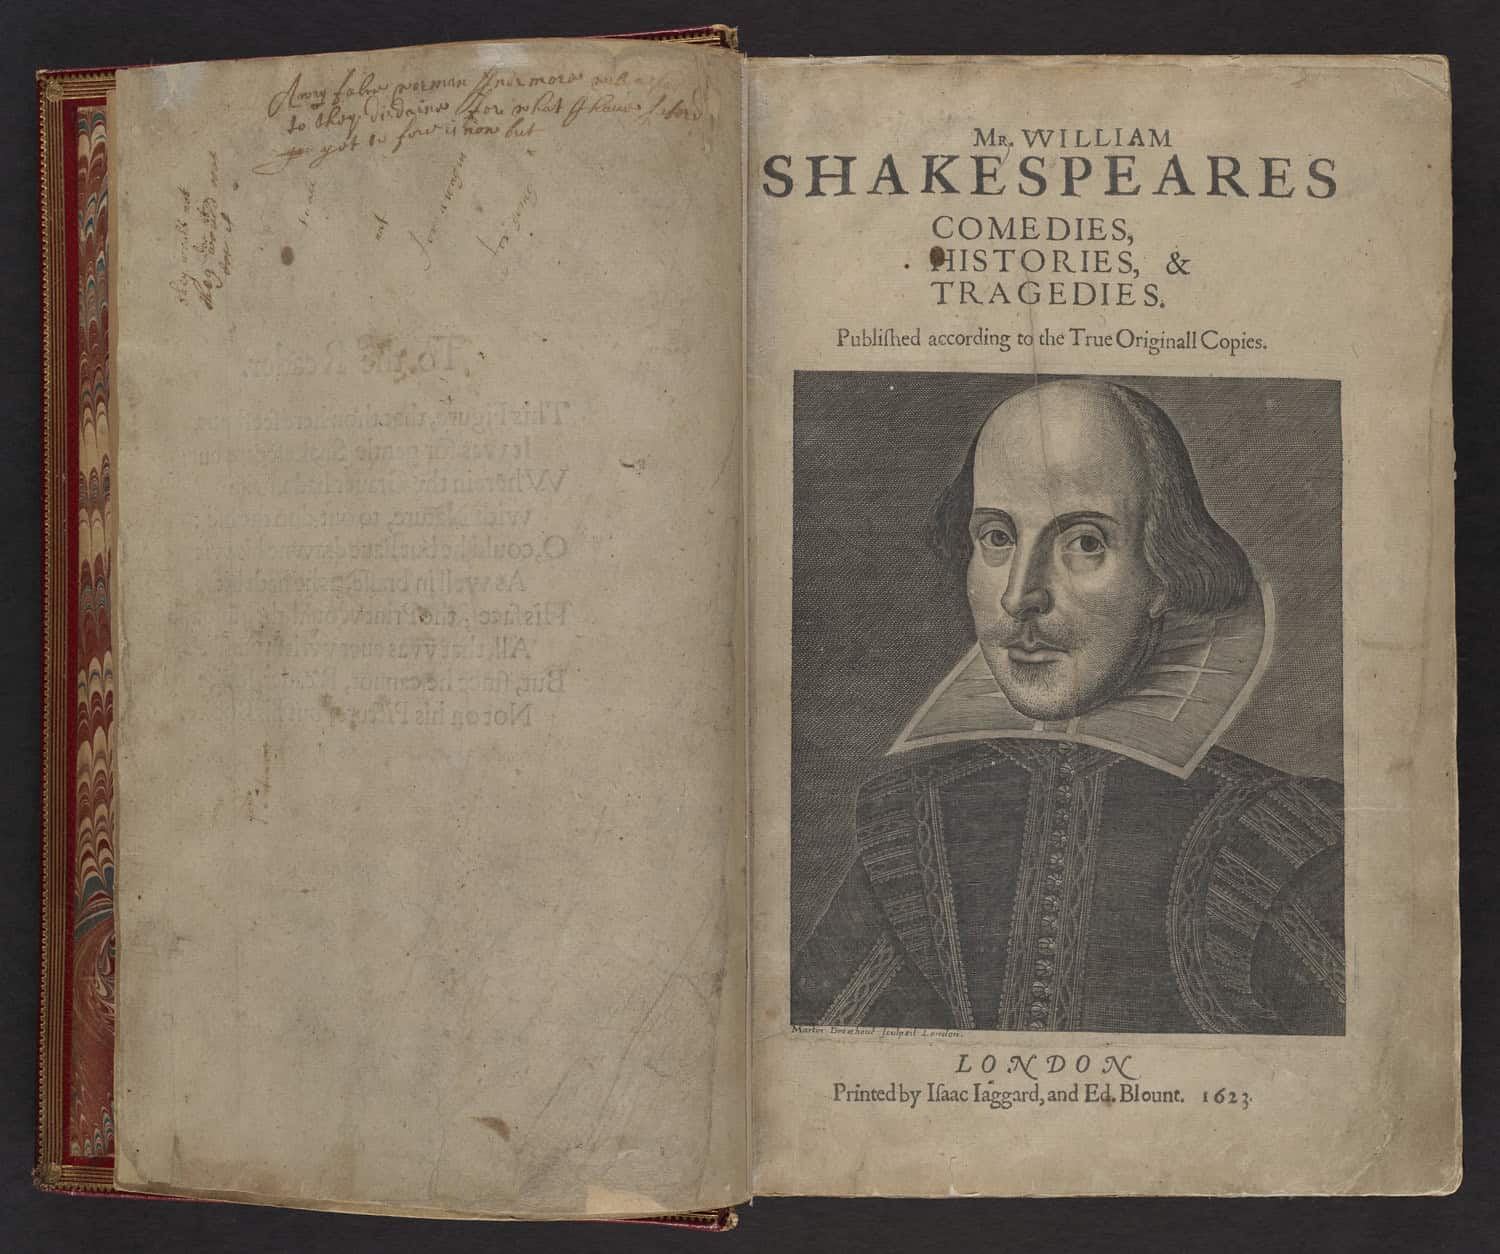 The First Folio by William Shakespeare (1623)